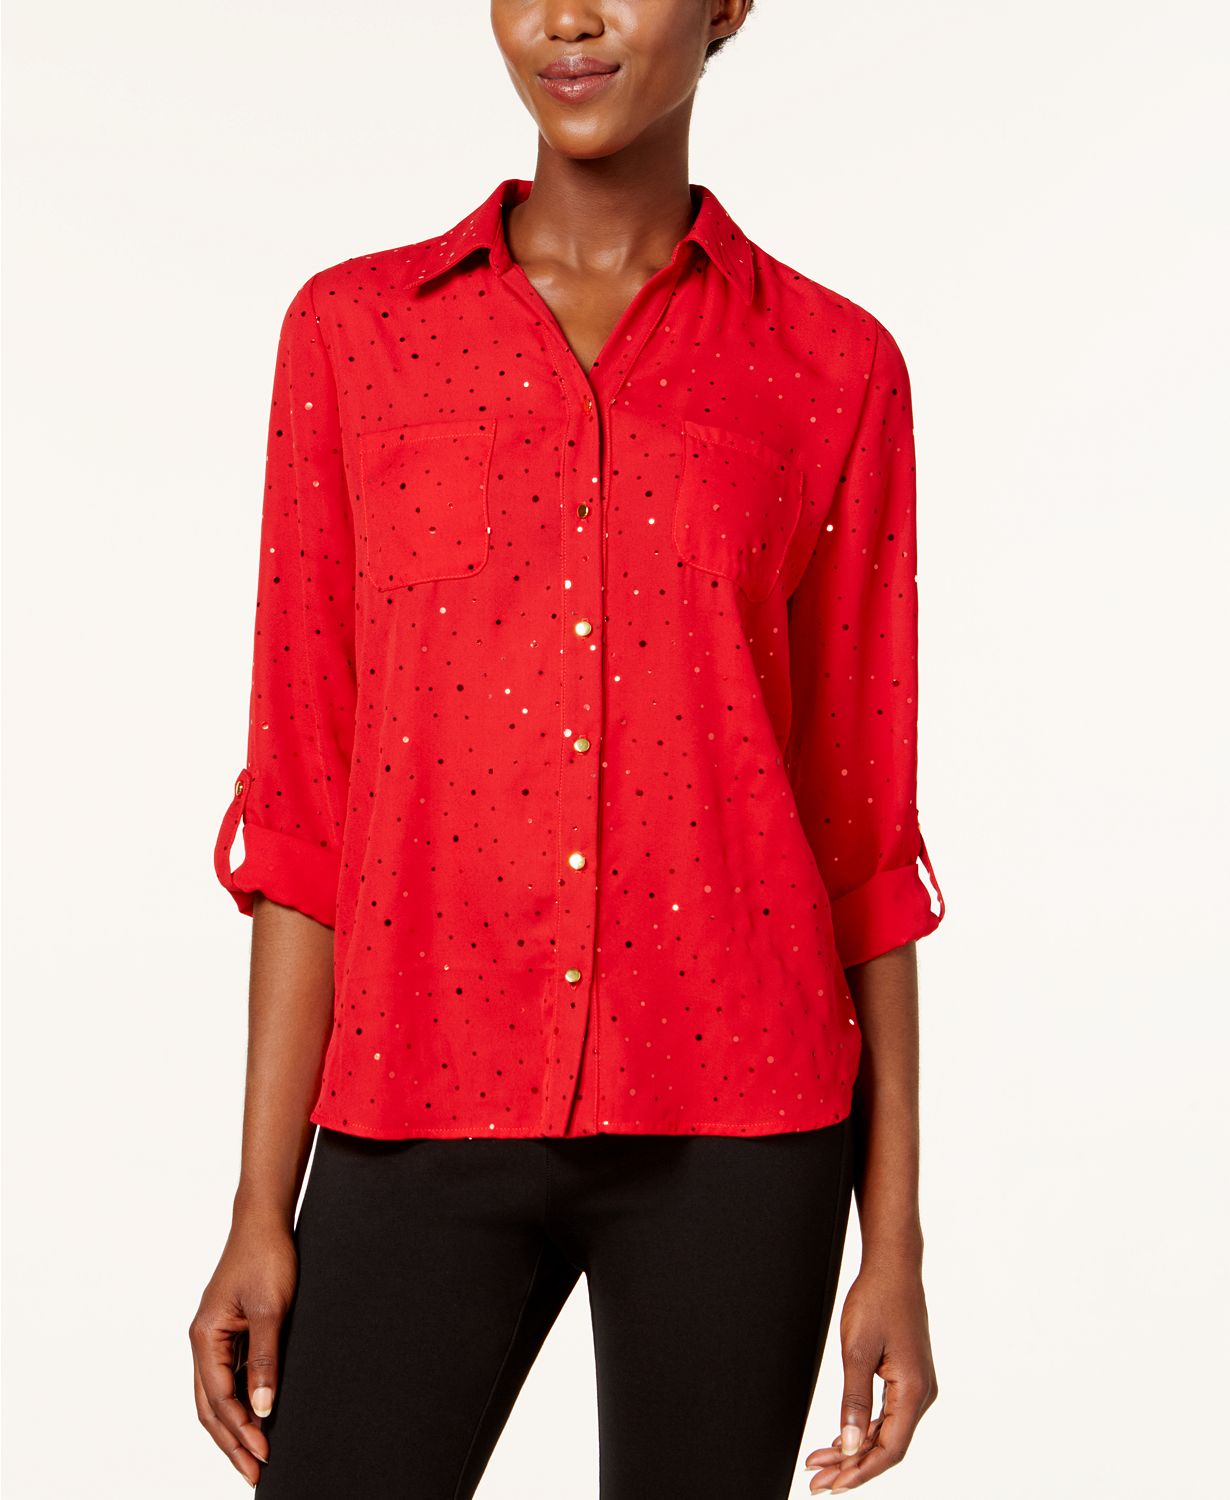 NY COLLECTION WOMEN'S UTILITY SHIRT DISCO D RED PM